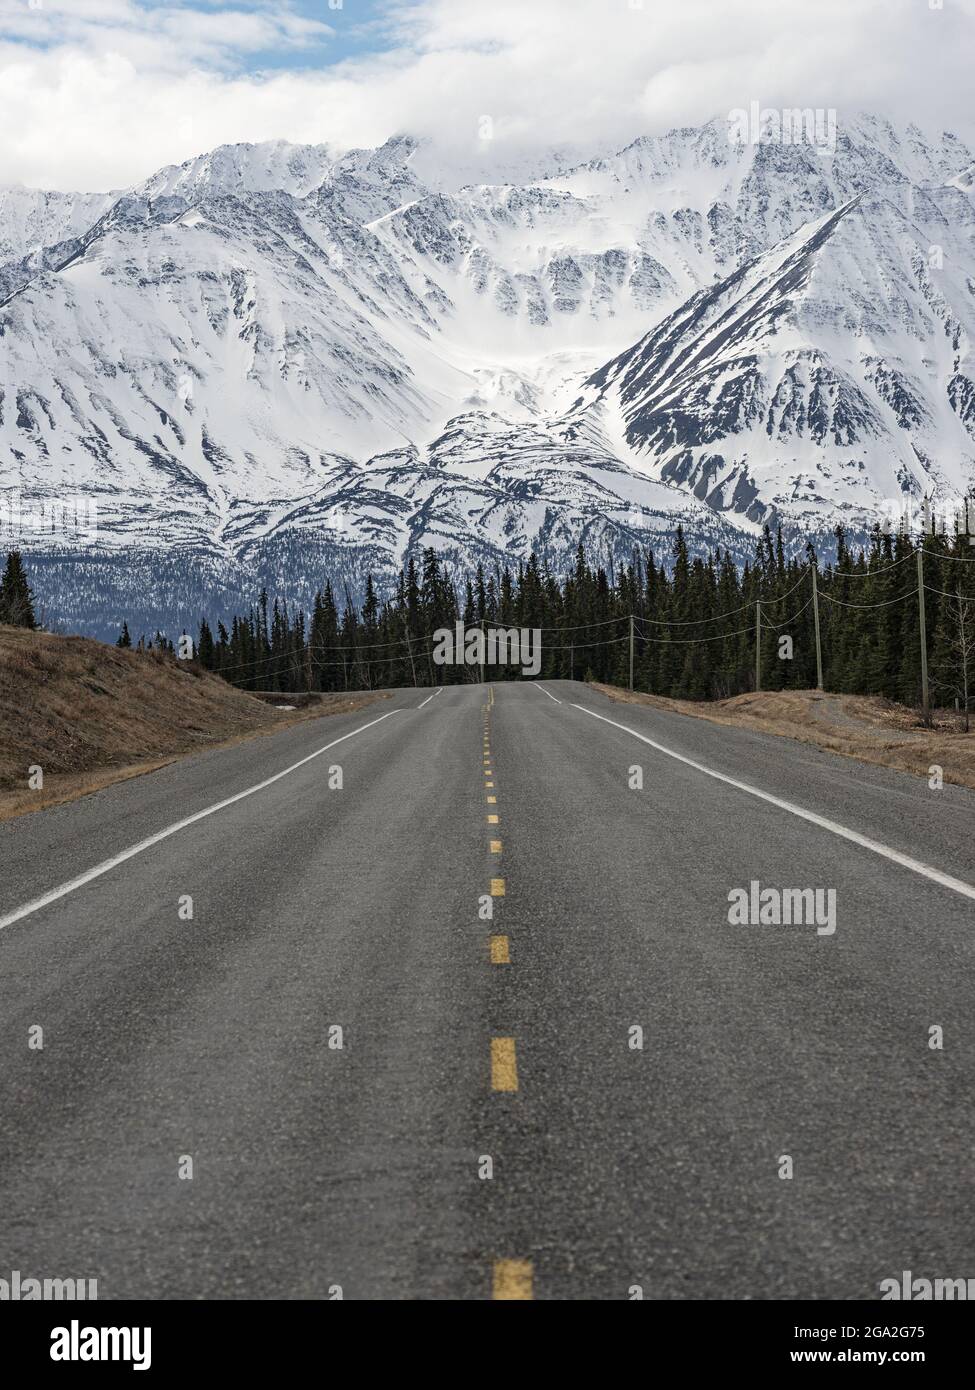 Alaska Highway just outside of the town of Haines Junction looking towards the mountains, situated in the Traditional Territory of the Champagne an... Stock Photo